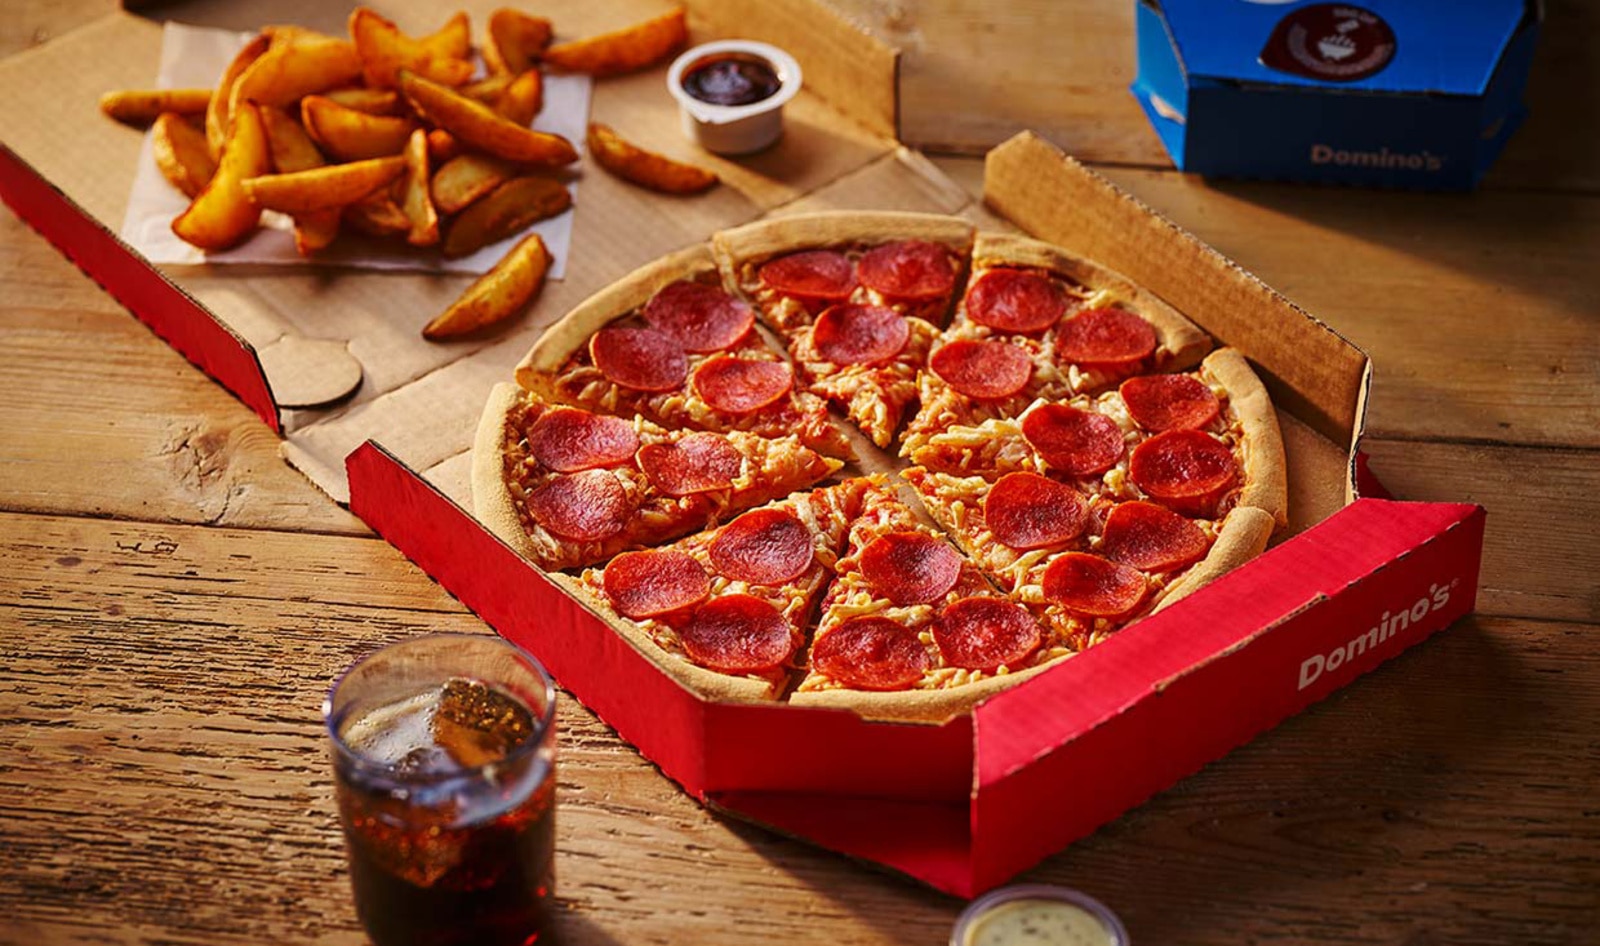 Domino's UK Just Launched Its First Vegan Pepperoni Pizza at All 1,200 Locations